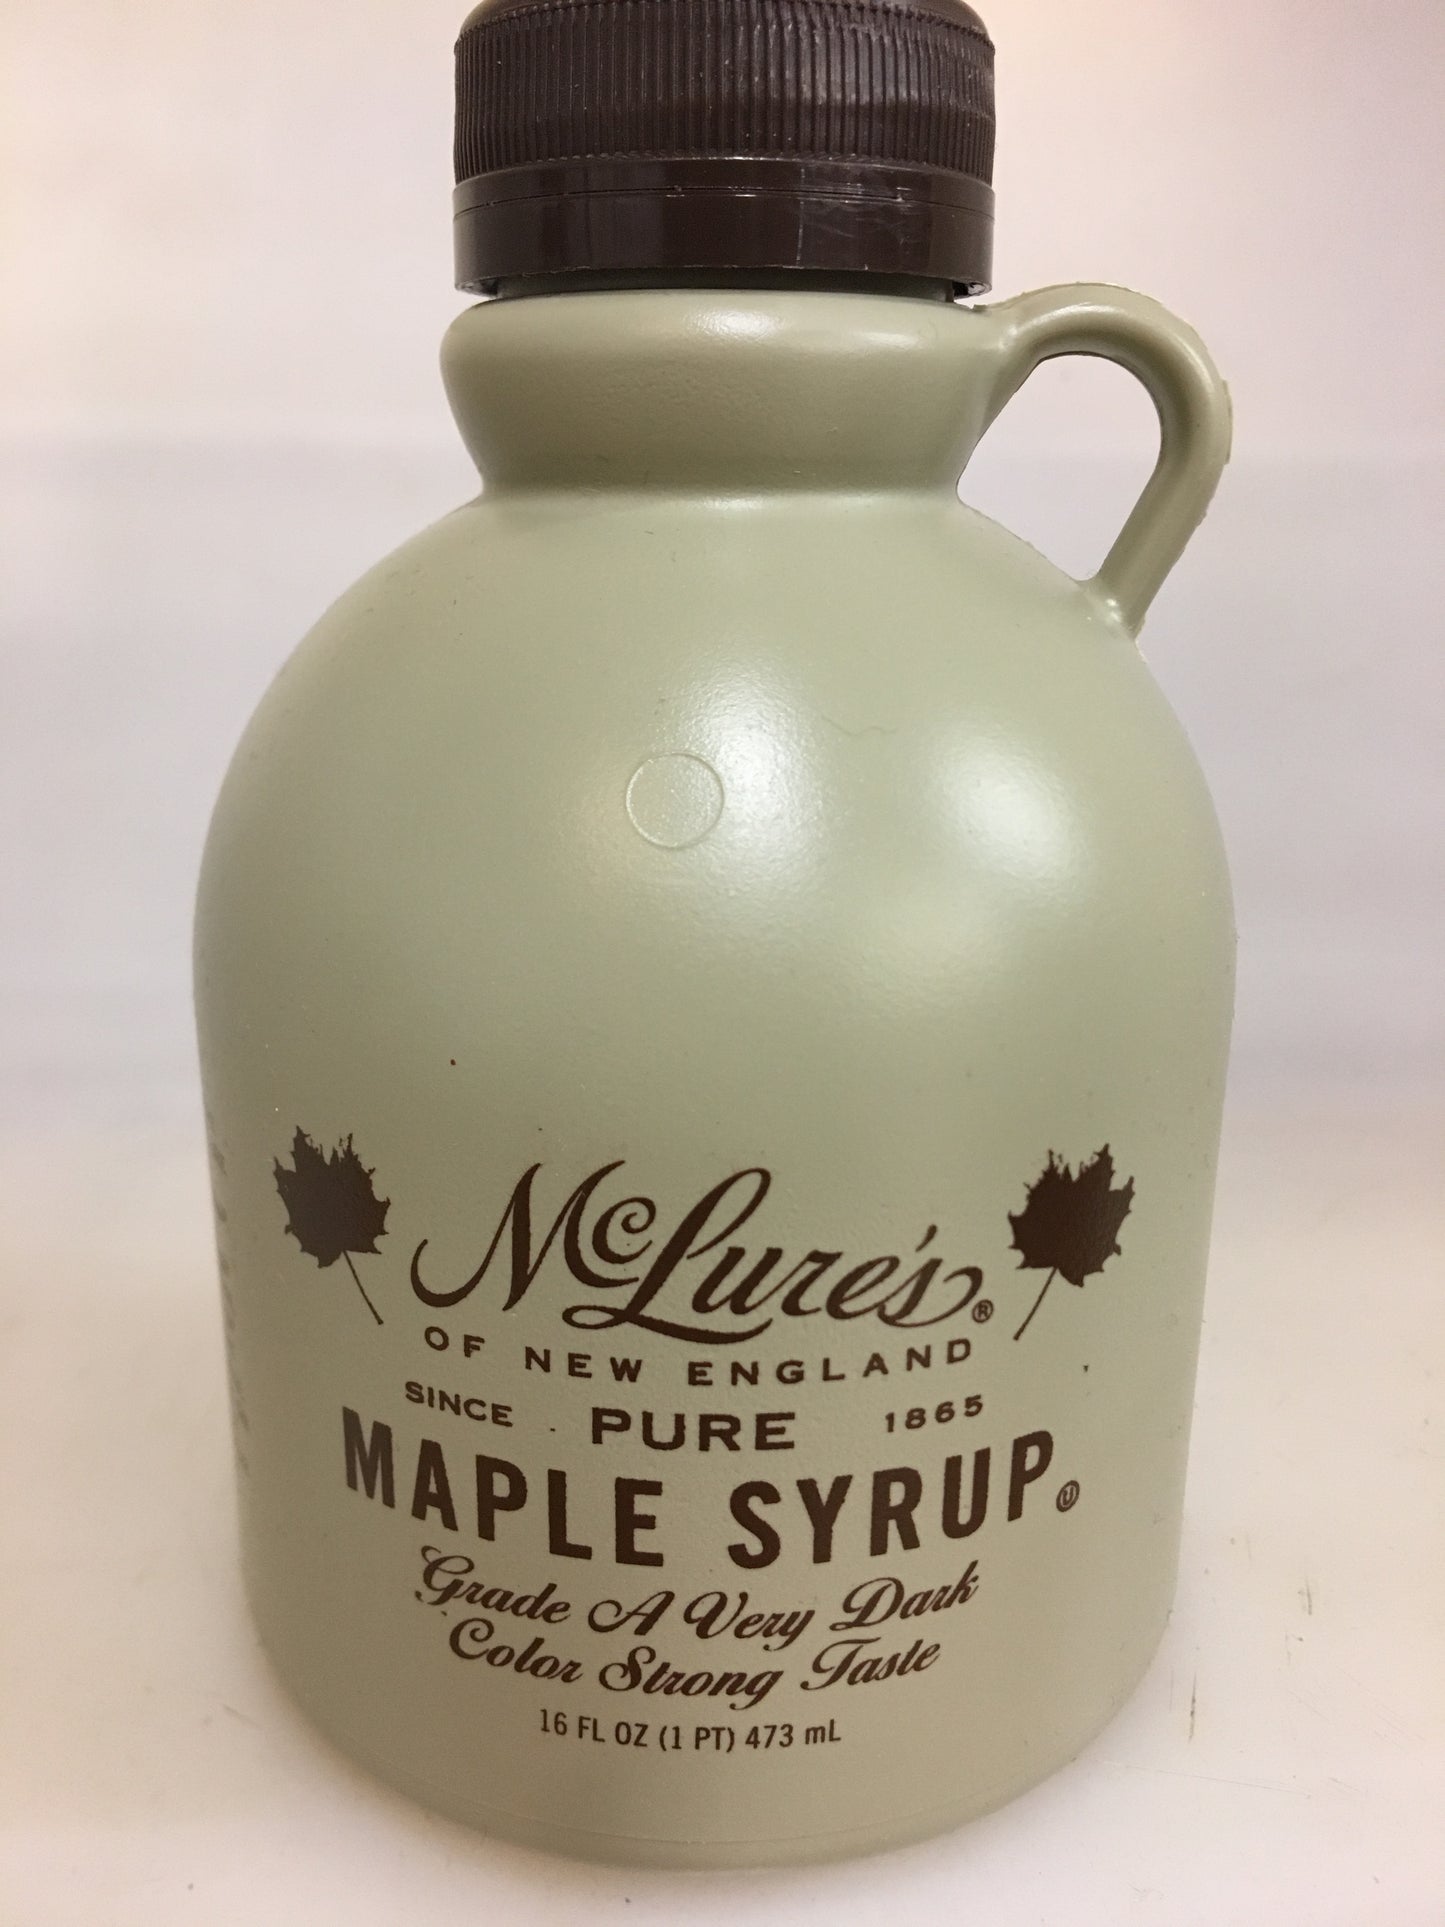 McLure's Pure Maple Syrup - Very Dark